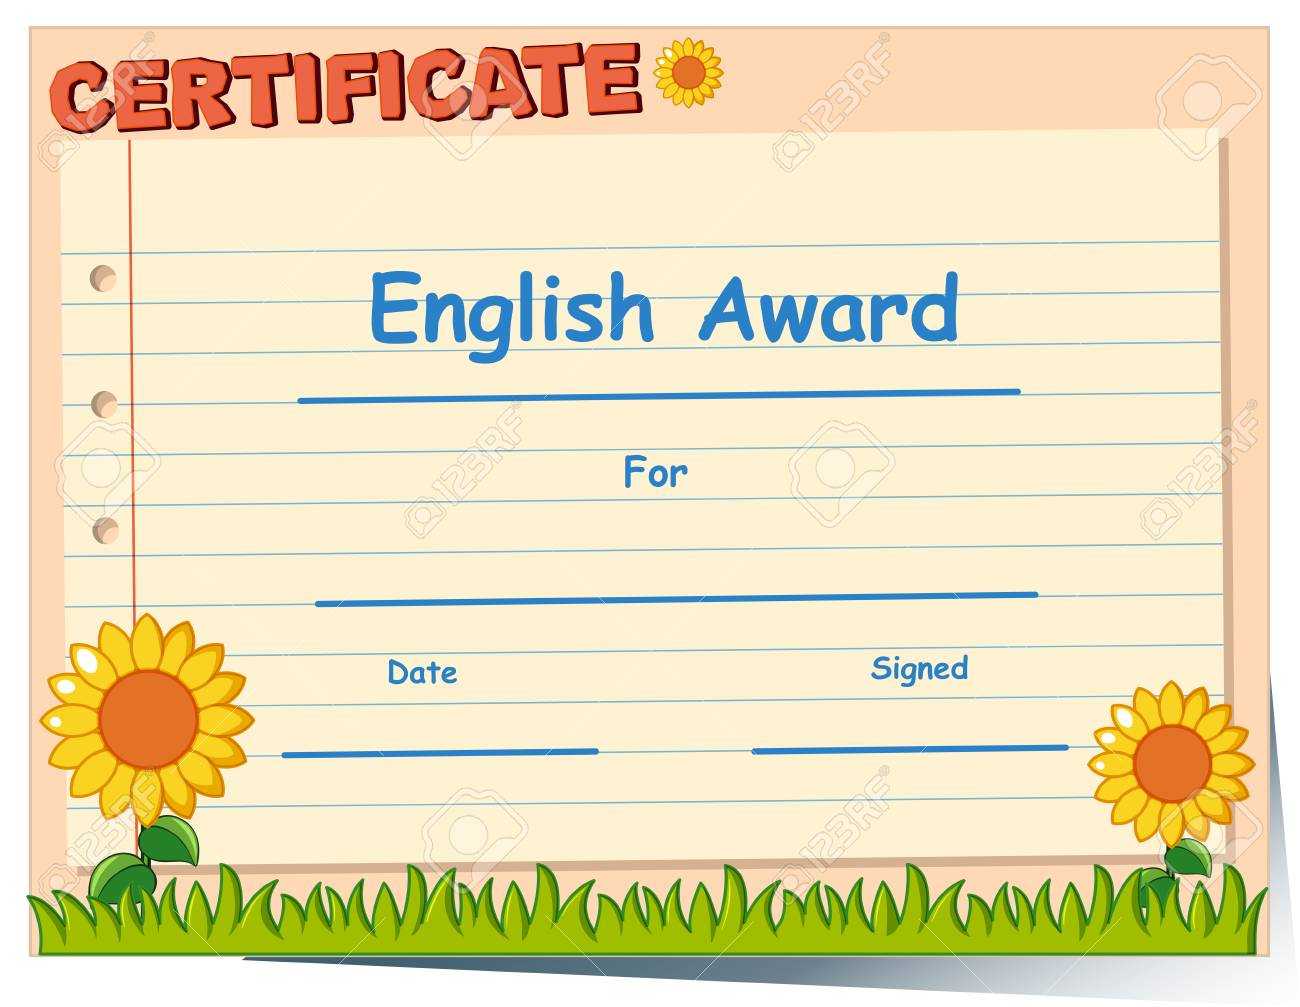 Certificate Template For English Award Illustration Within Free Printable Blank Award Certificate Templates